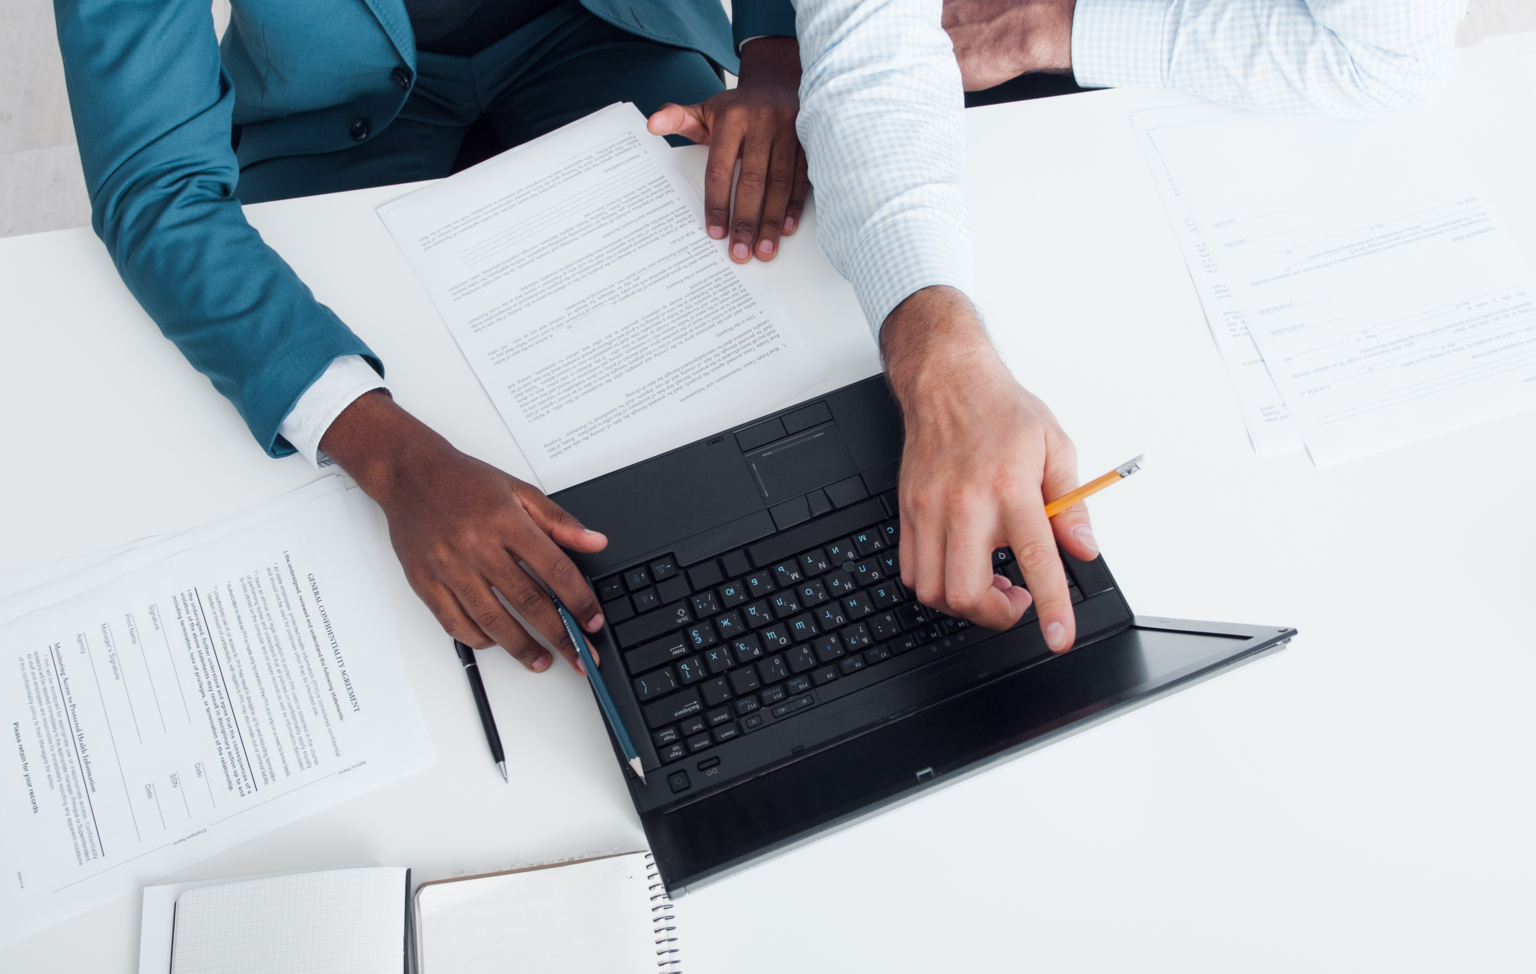 two people pointing at a laptop in resume coaching